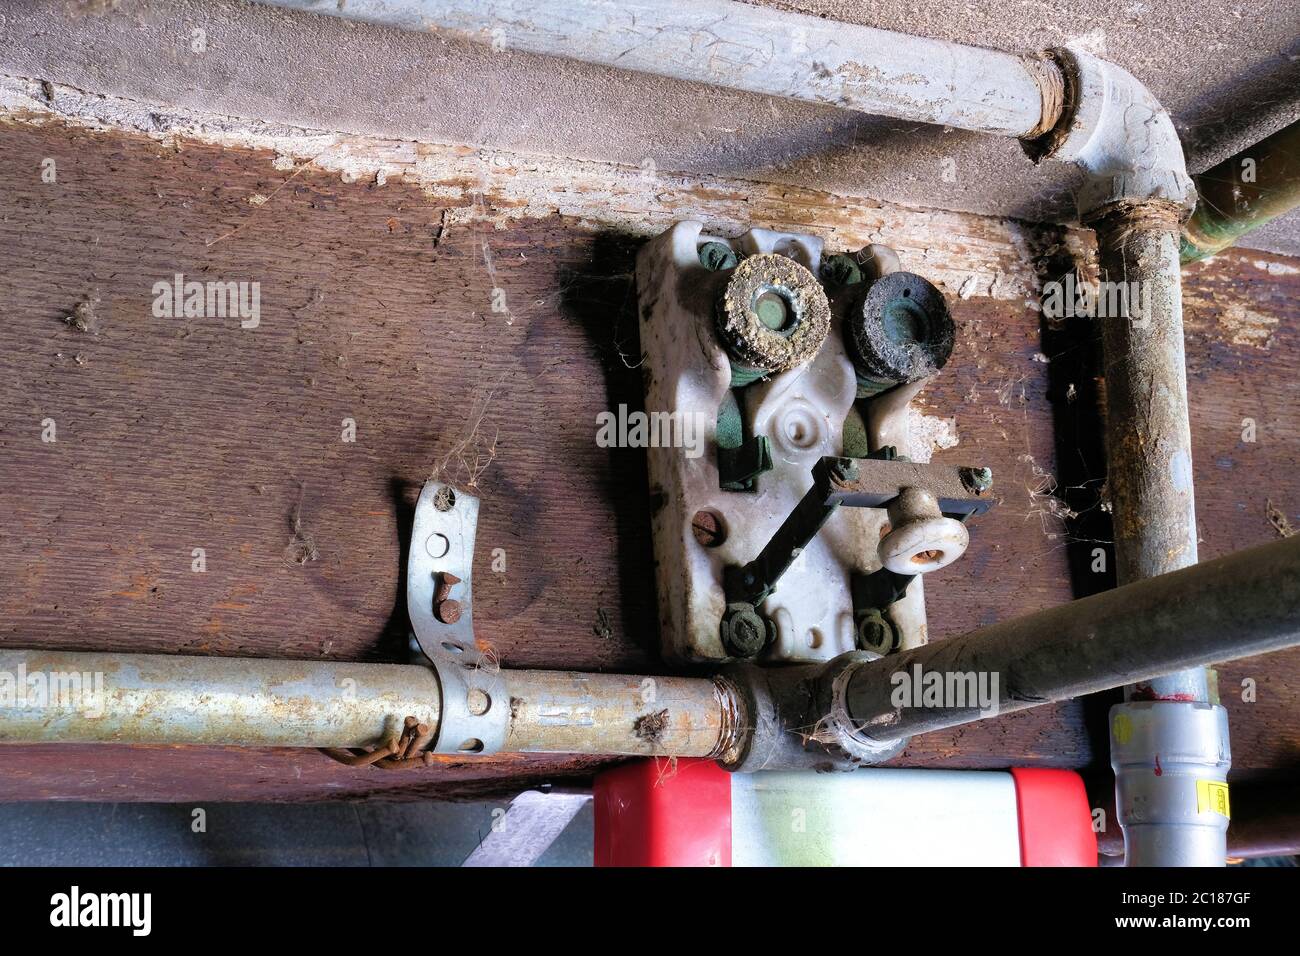 Antique porcelain block fuse switch circuit breaker; architectural breaker knife switches with mica fuse sockets screwed onto a wood beam. Stock Photo